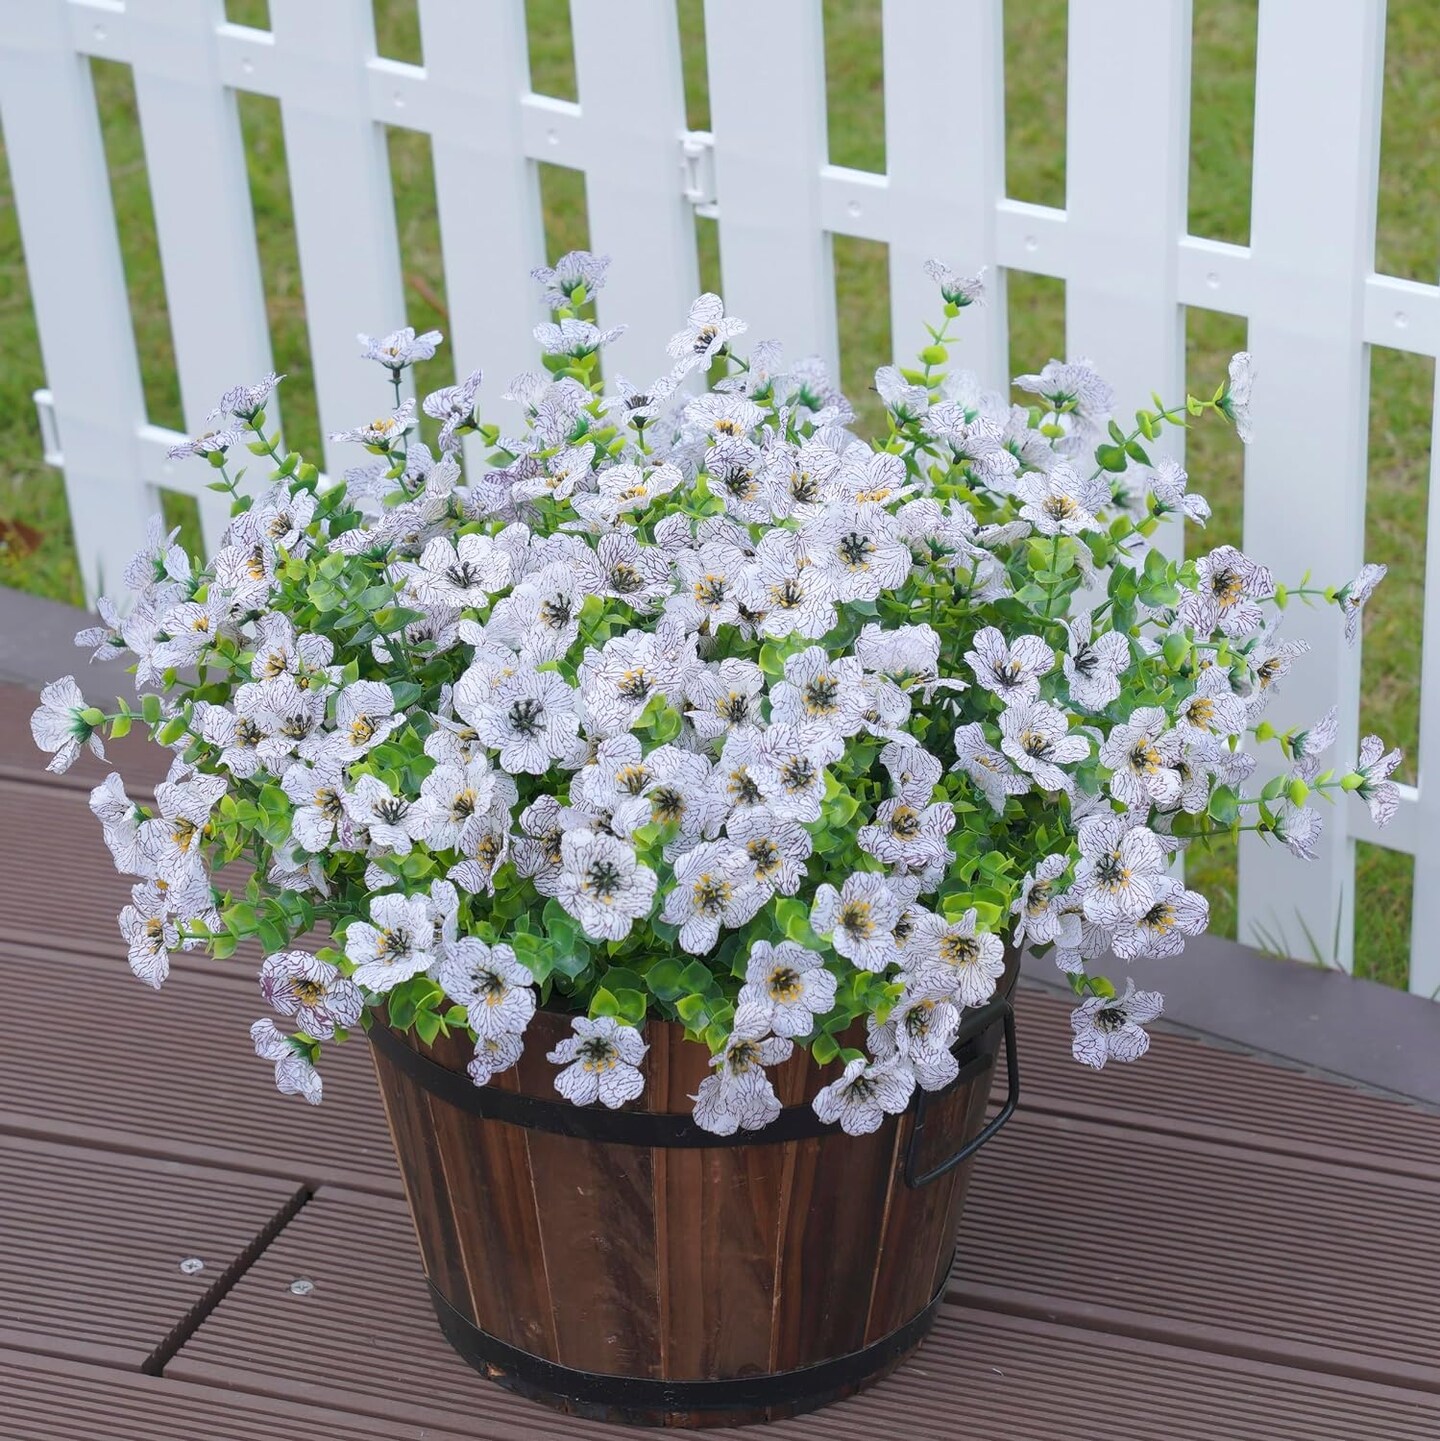 Artificial Fake Plants Flowers for Outside Spring Summer Decoration, 12 Bundles of Faux Silk White Daisy UV Resistant Realistic for Porch Patio Home Window Box Yard Garden Planter